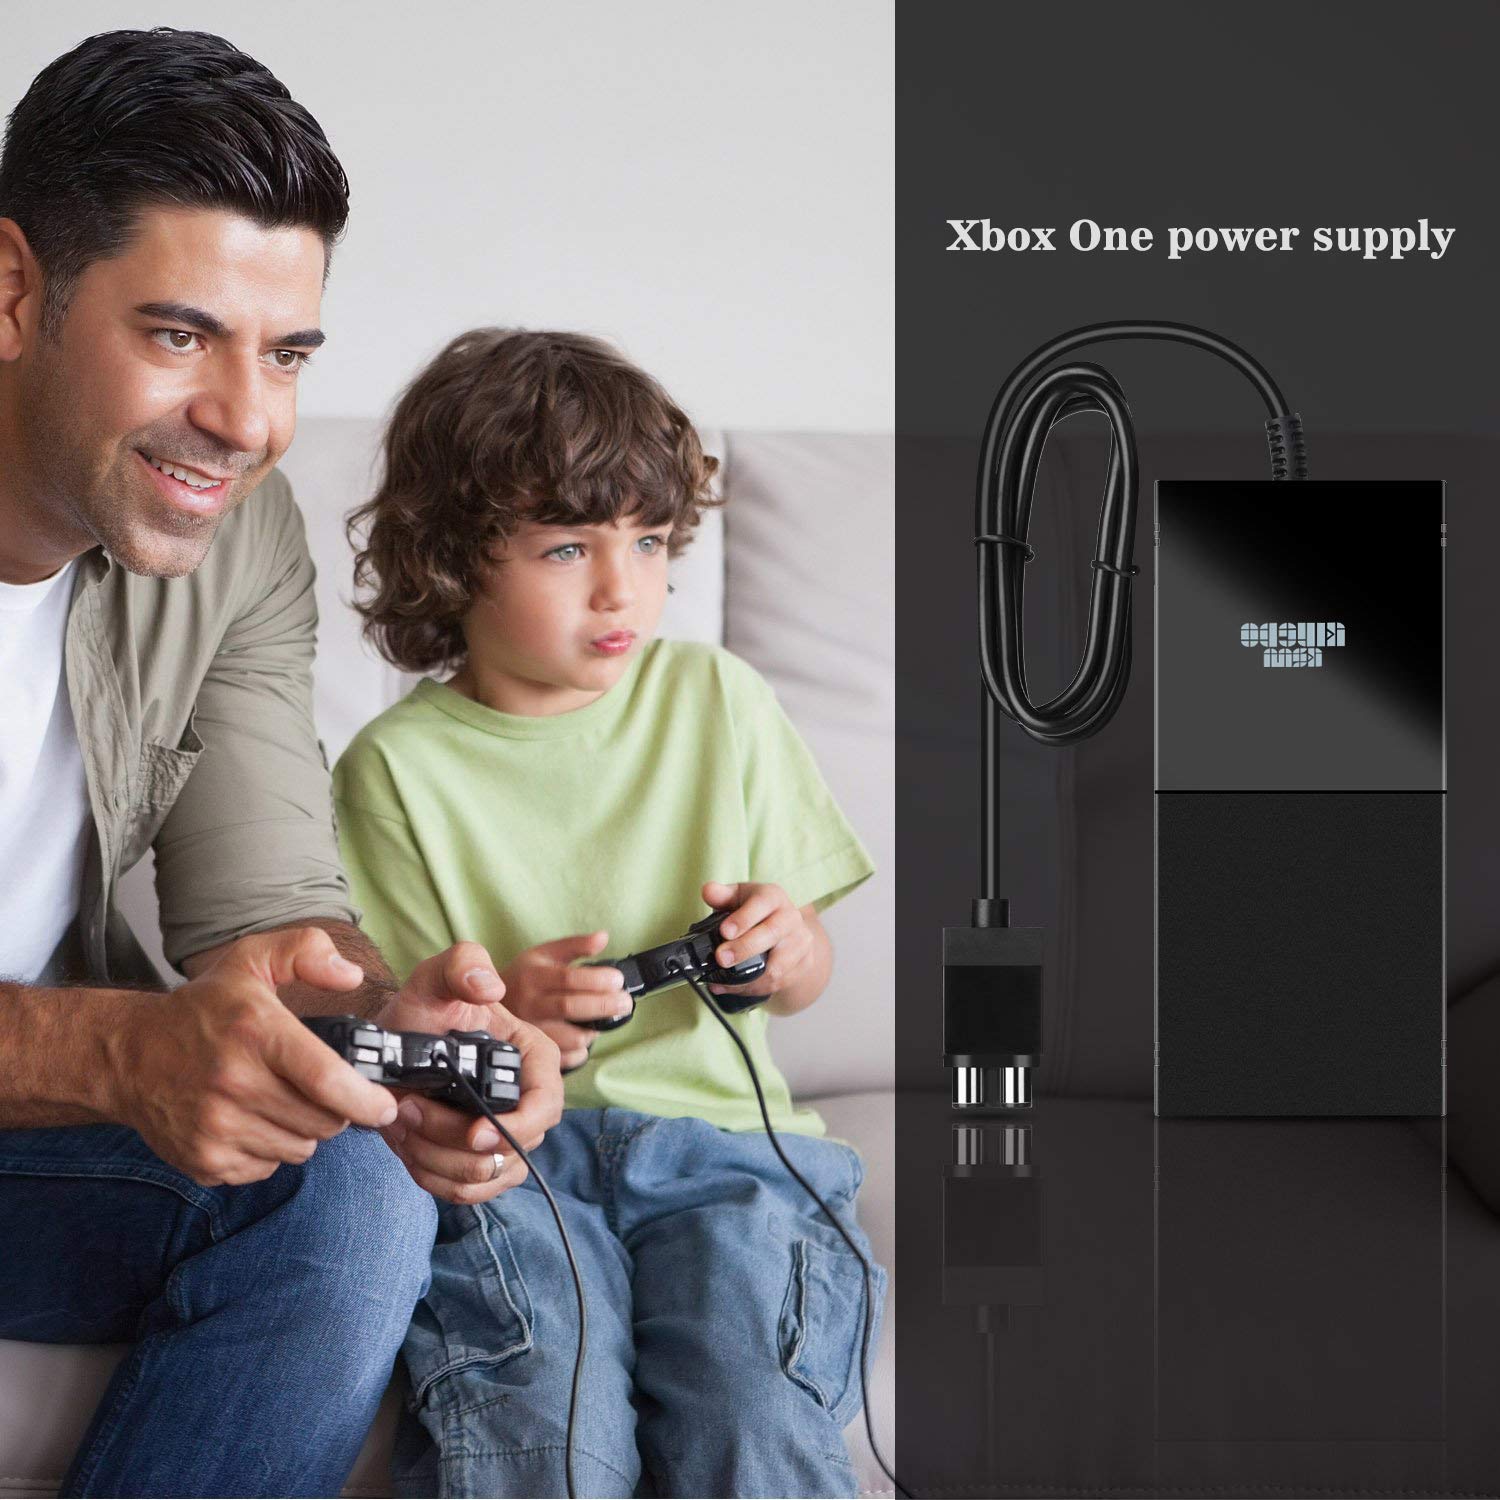 Power Brick Compatible with Xbox One Power Supply Brick for Xbox One, KSW KINGDO Power Supply for Microsoft Xbox one [Sole Newest Quietest Version]